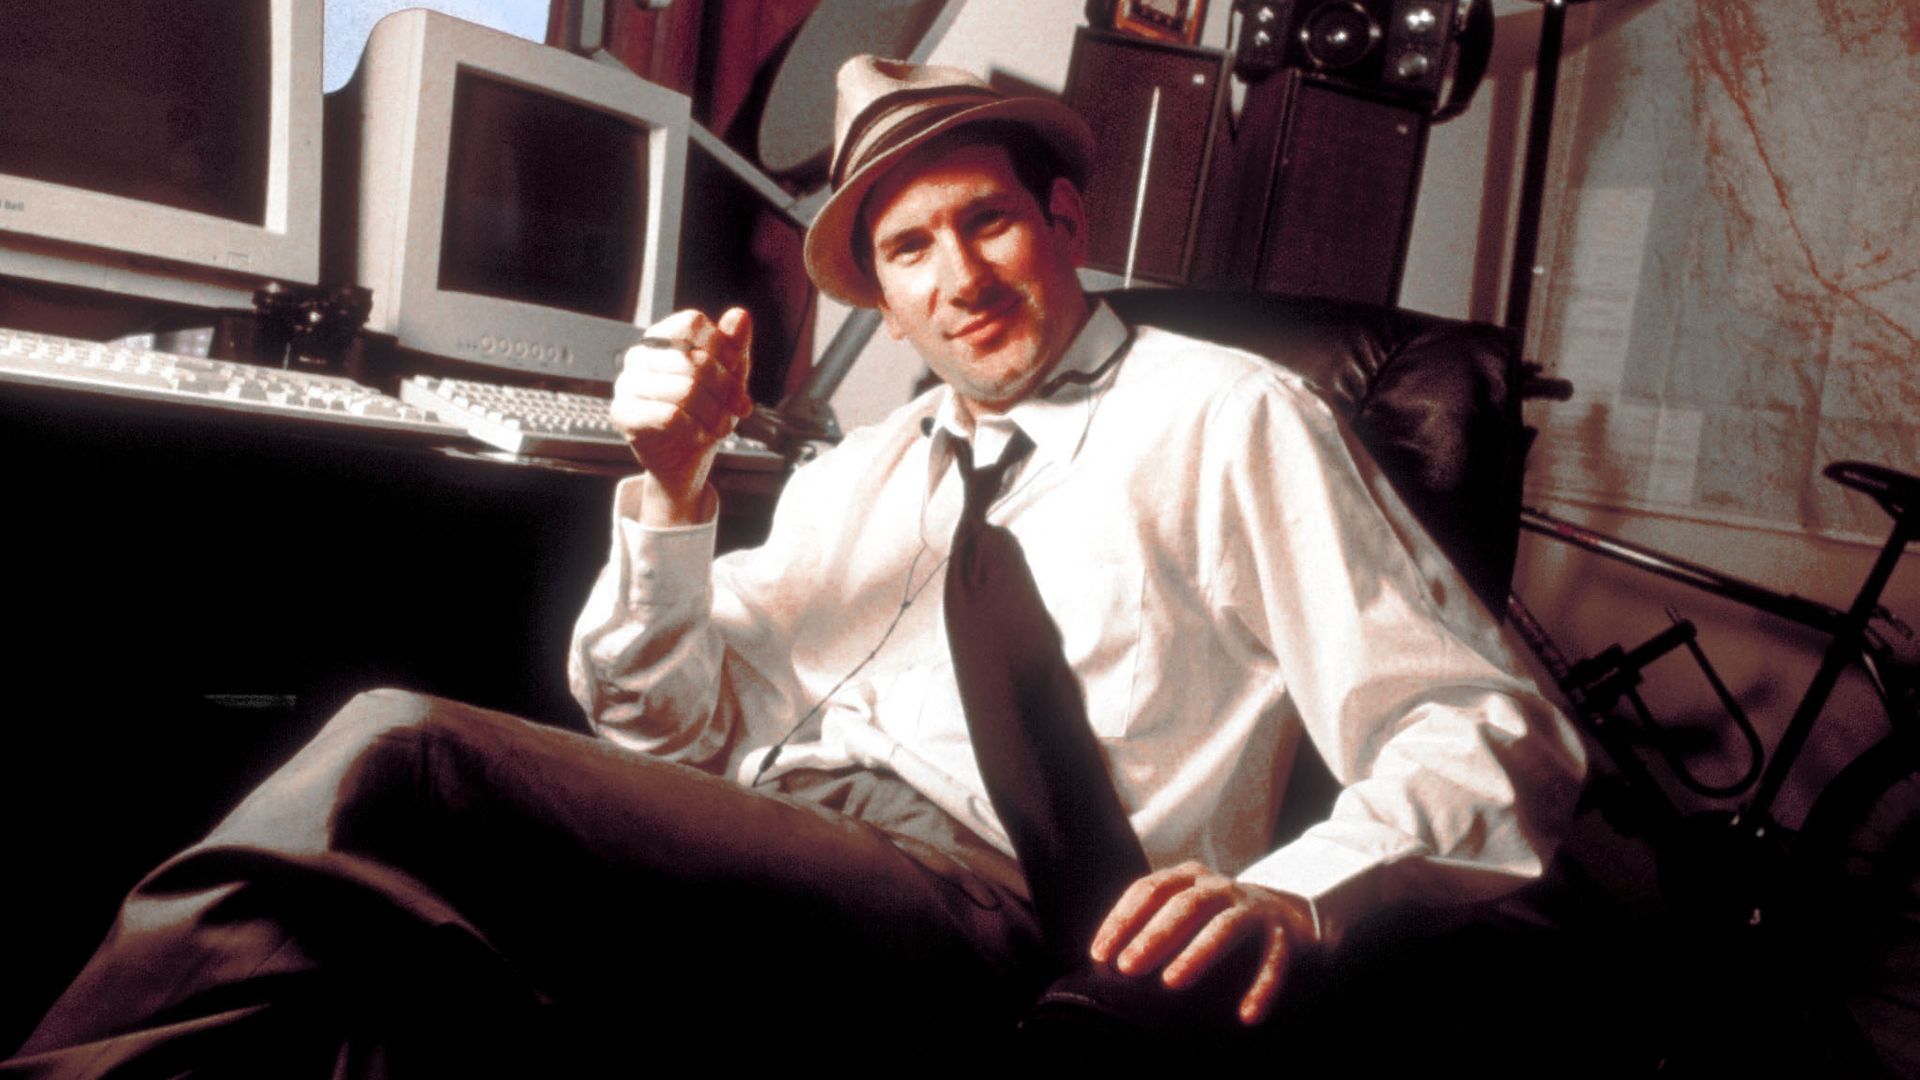 Drudge in his home office in 1997